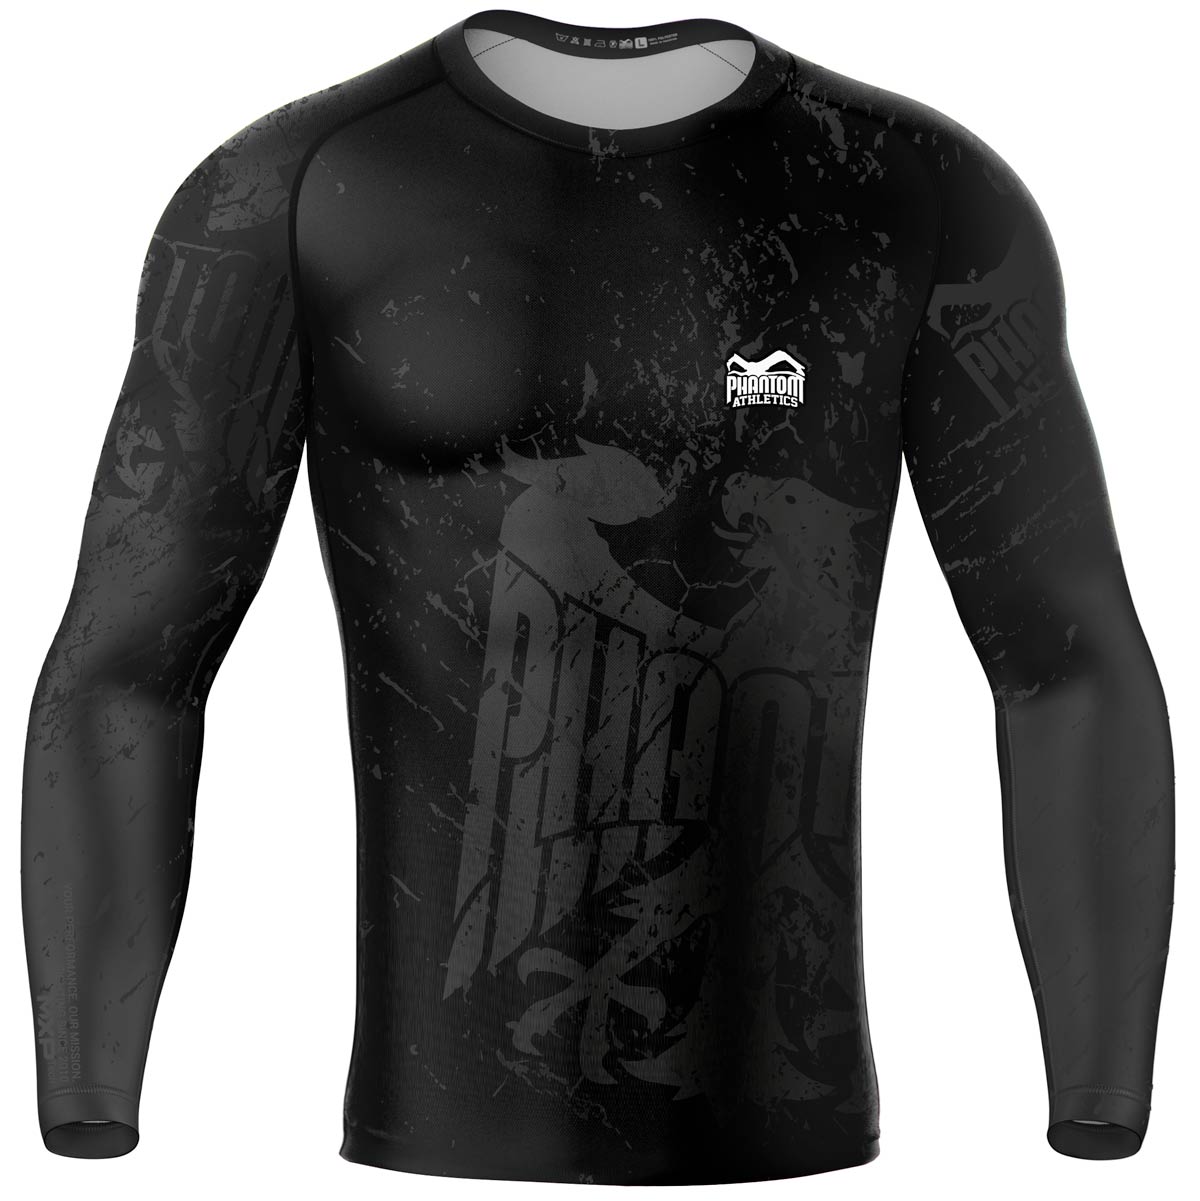 The Phantom EVO long sleeve compression rashguard in Team Germany design. With Germany eagle and "Never Back Down" lettering. Ideal for your combat sports, such as MMA, Muay Thai, wrestling, BJJ or kickboxing.